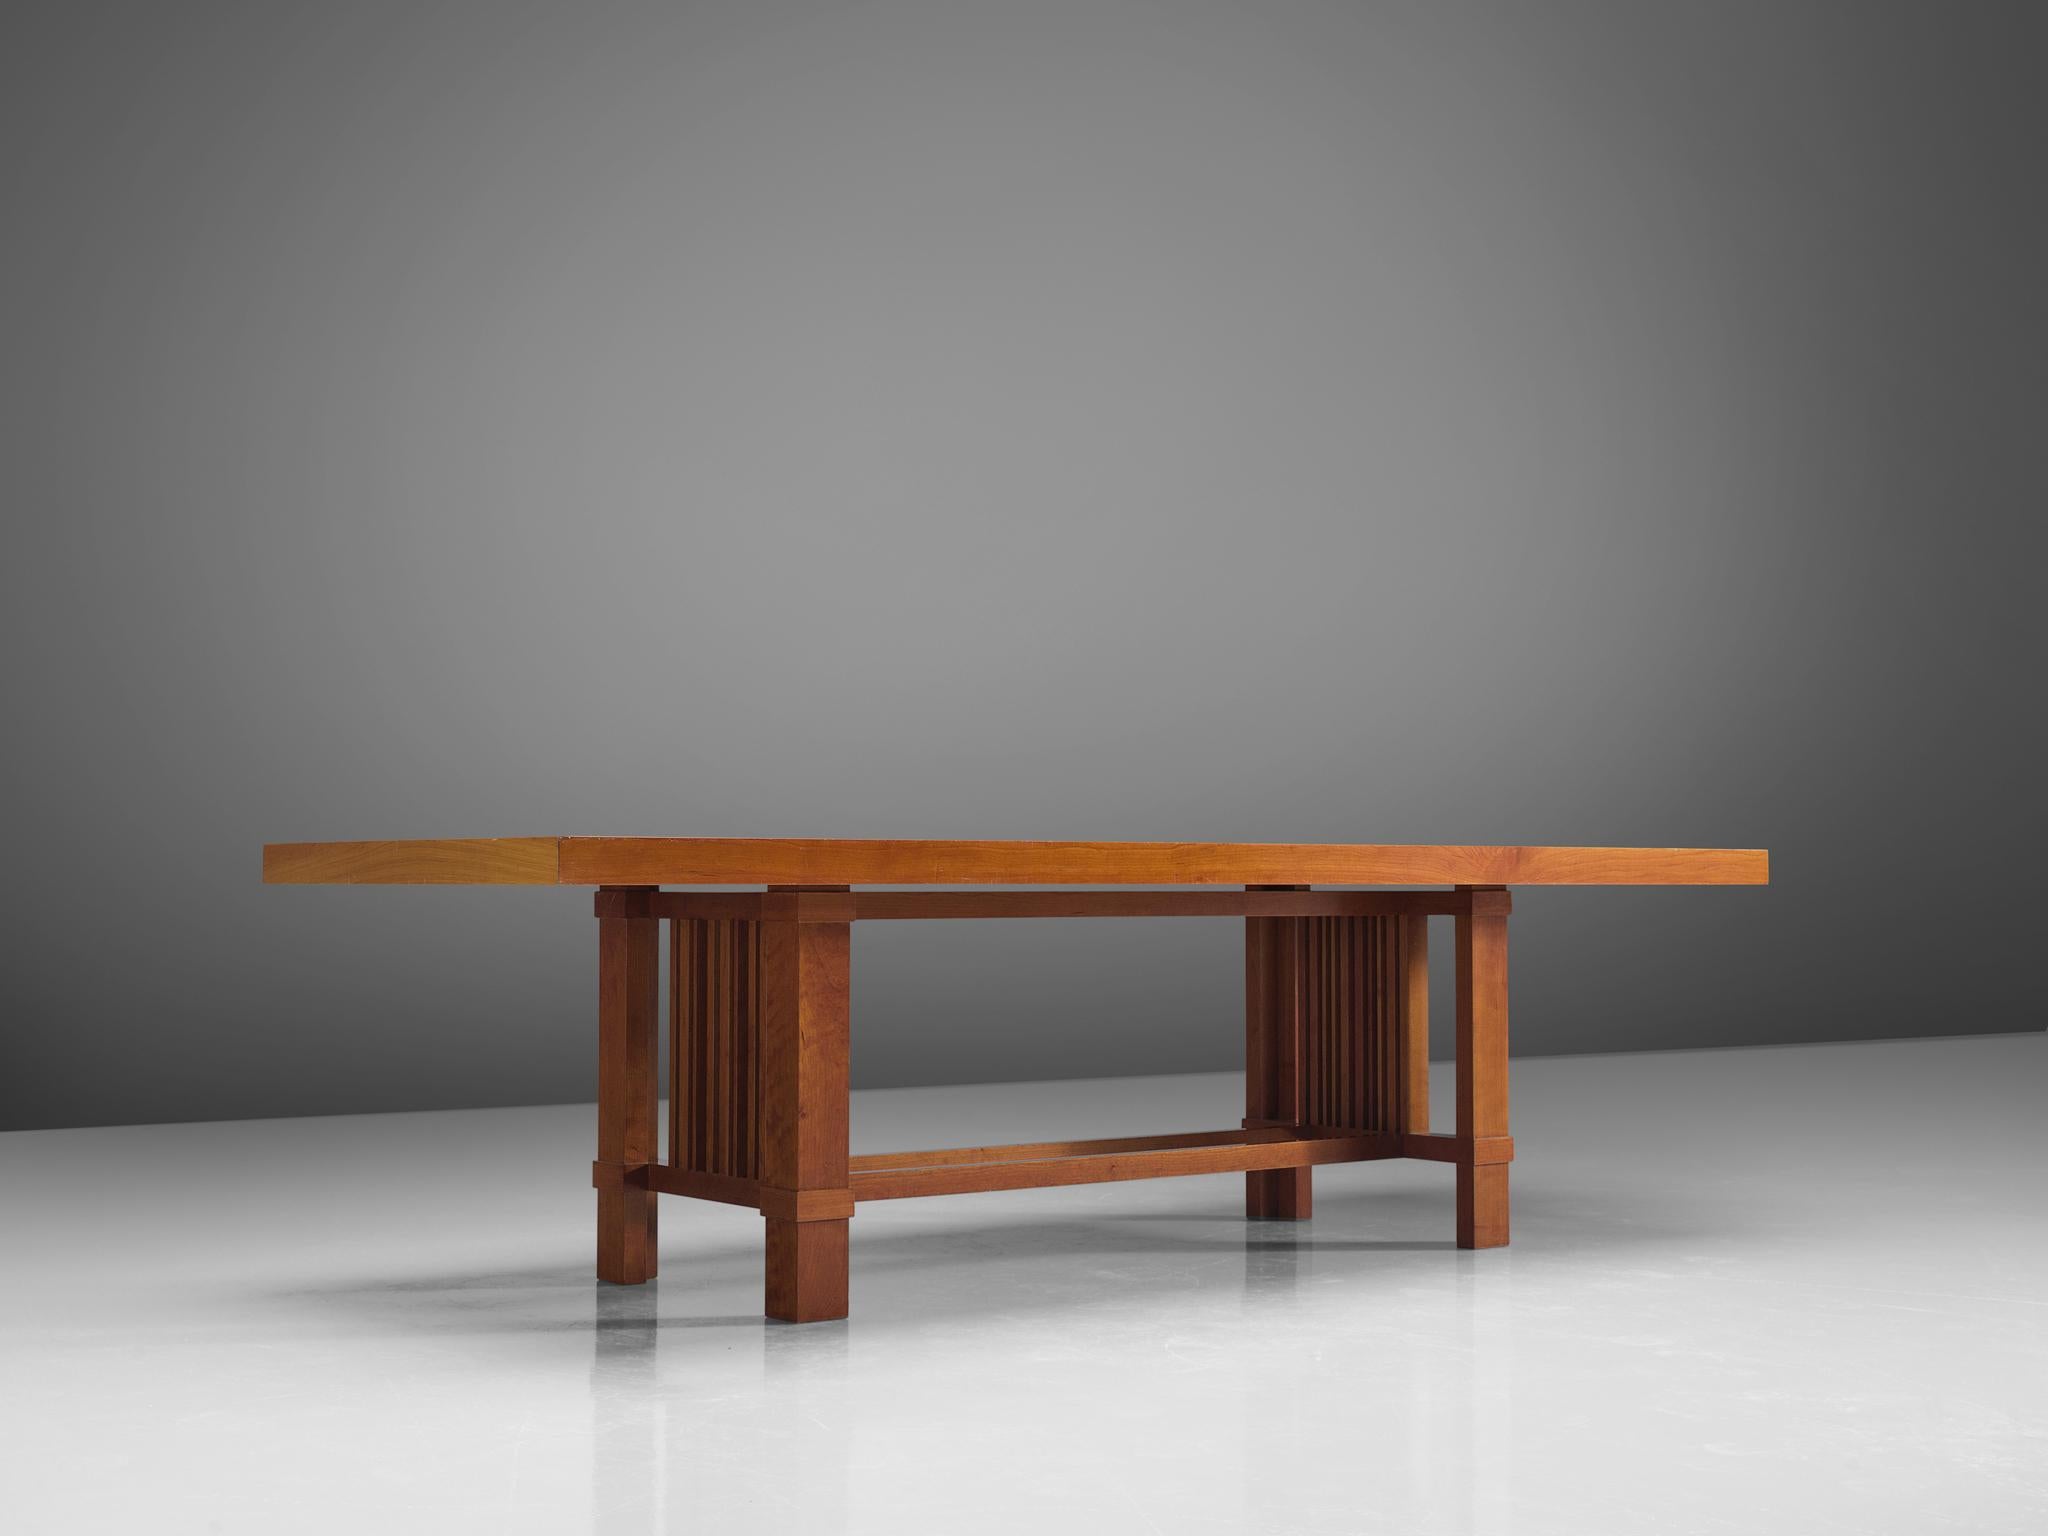 Frank Lloyd Wright for Cassina, '608 Taliesin' dining table, cherry, United States, design 1917, production 1989,

This 'Taliesin' table model 608 was designed by Frank Lloyd Wright in 1917 and produced by Cassina in 1989. The table has an